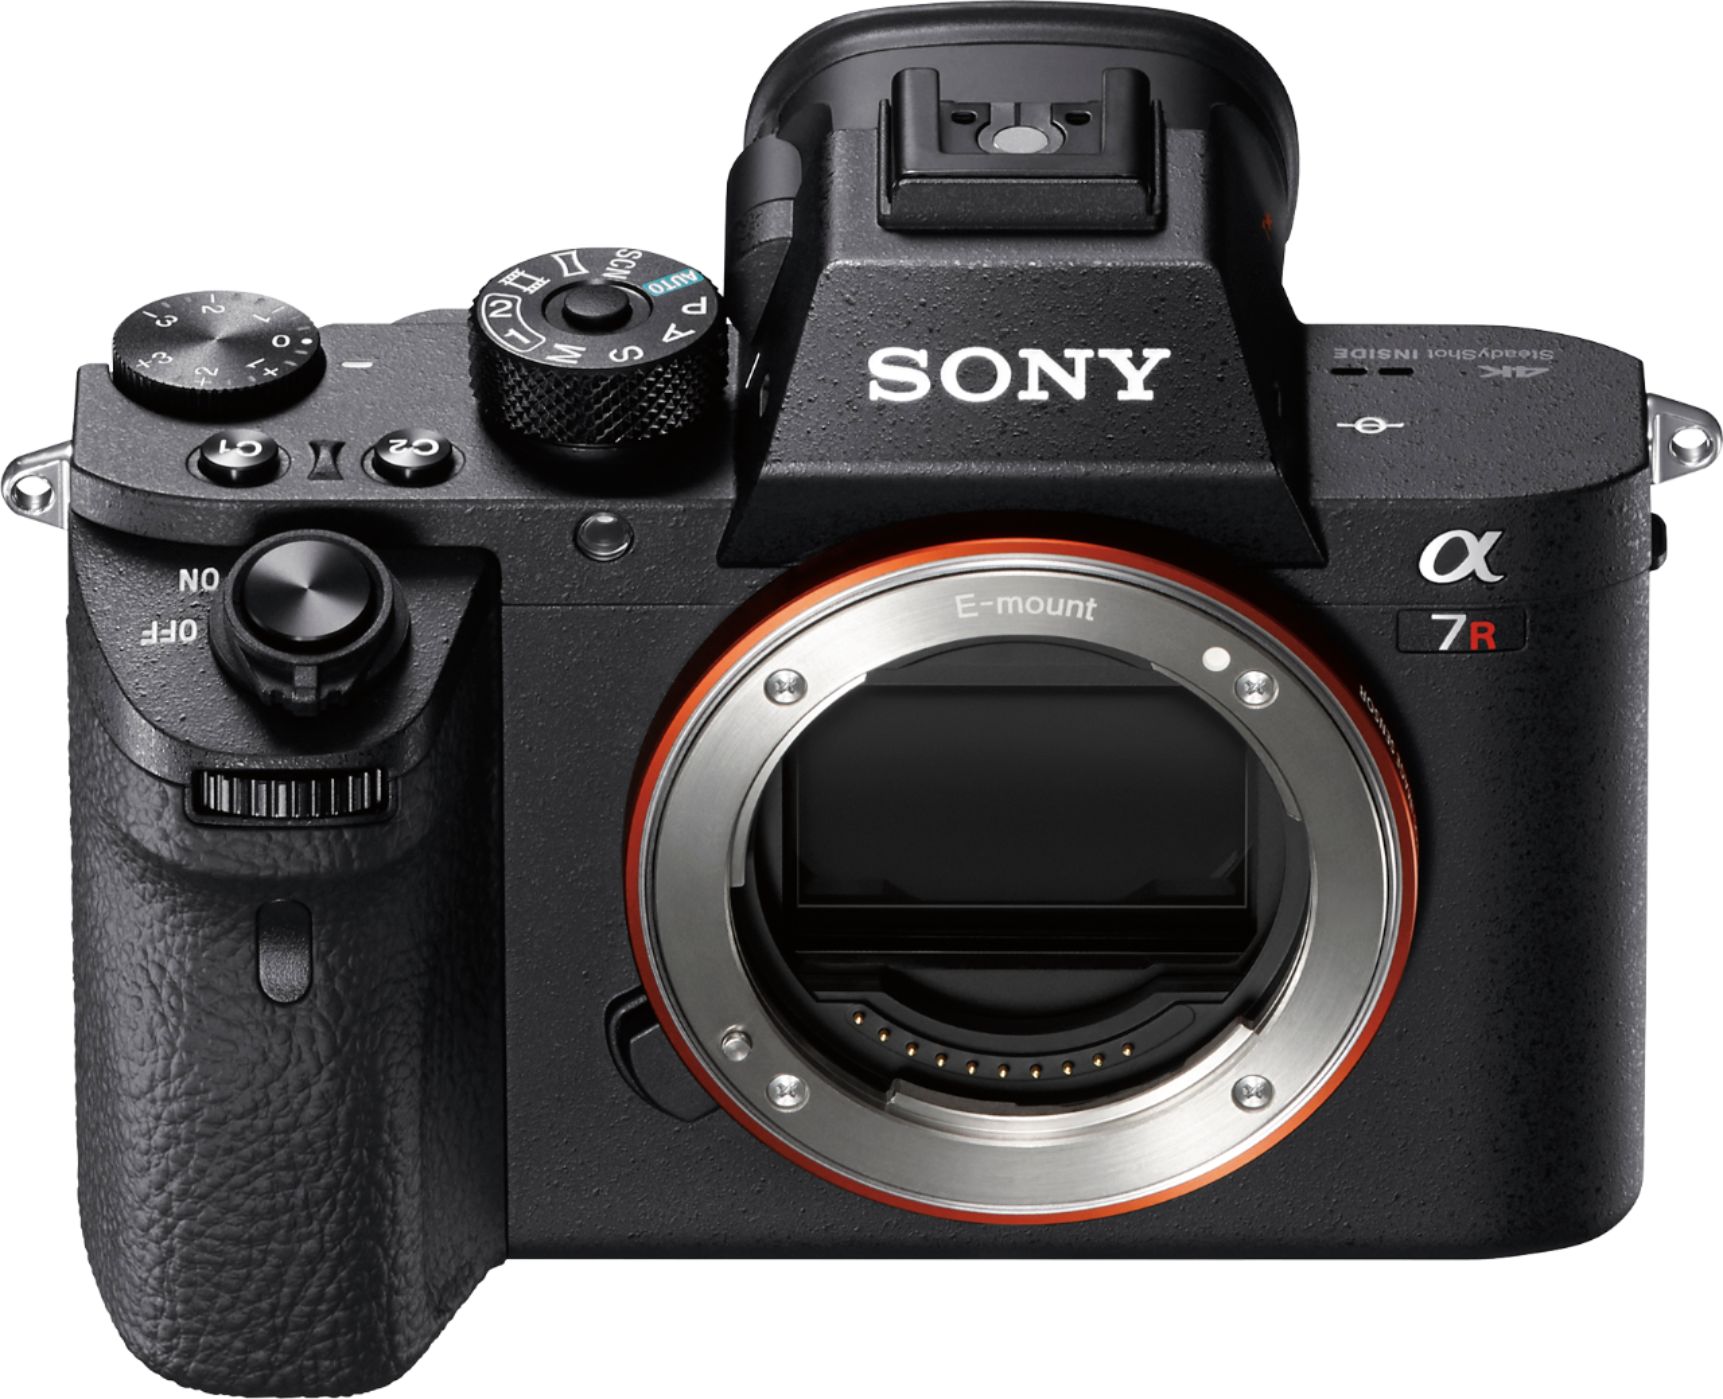 Sony A7 II review: the next great camera, someday - The Verge